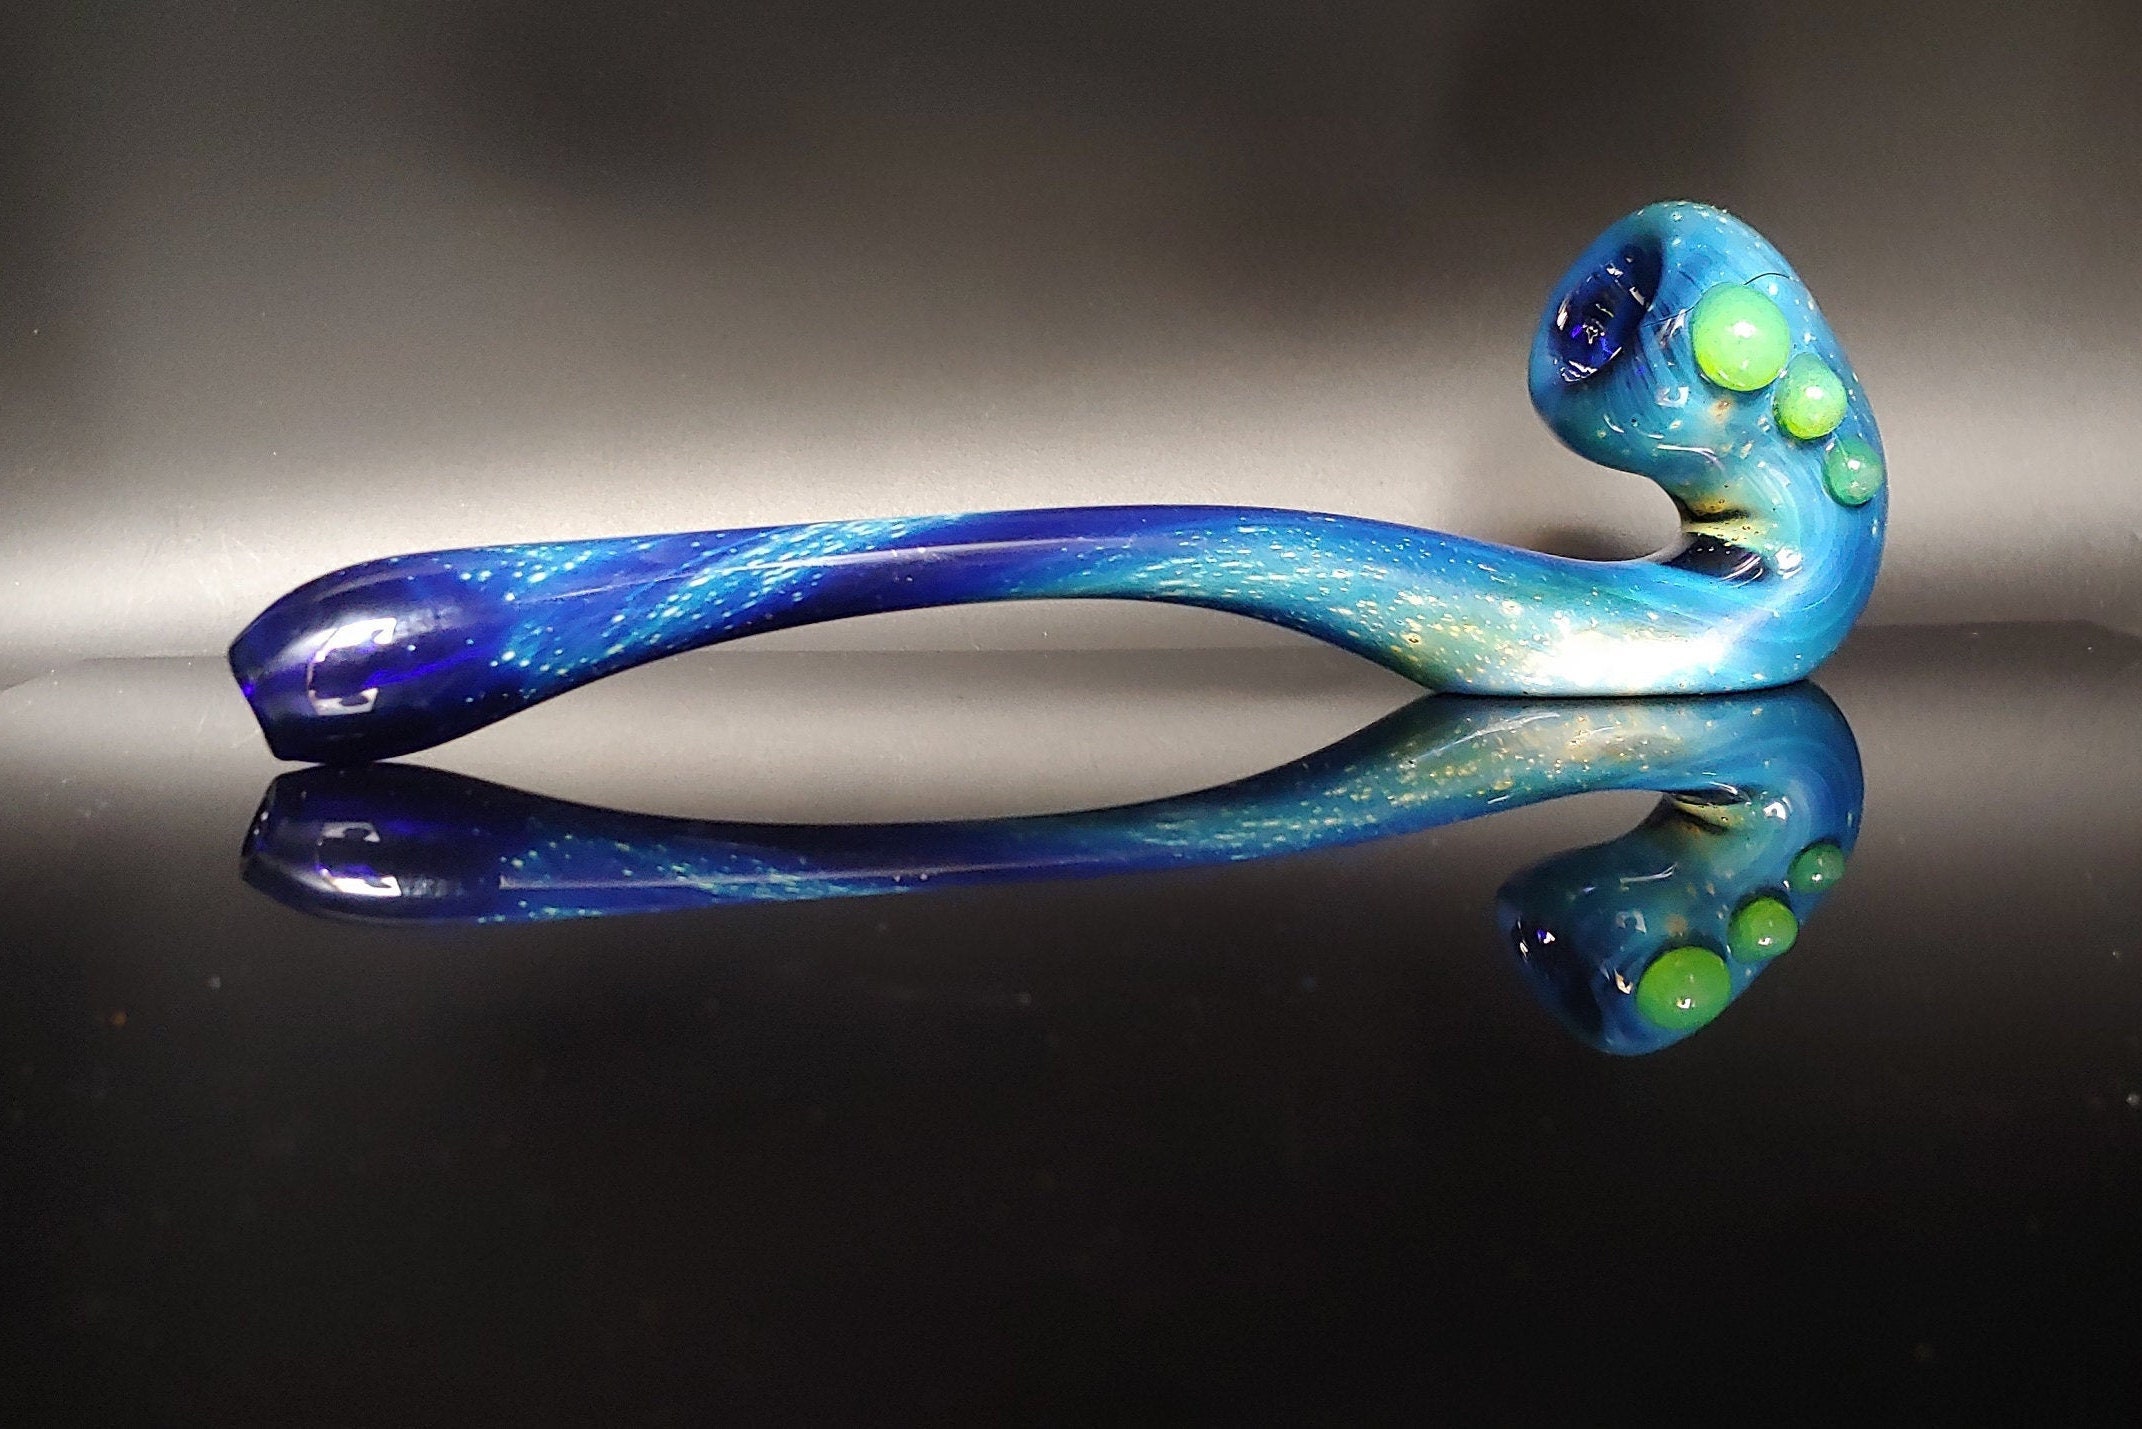 6.6 inch Mini Gandalf Pipe for Weed, by DSGFS